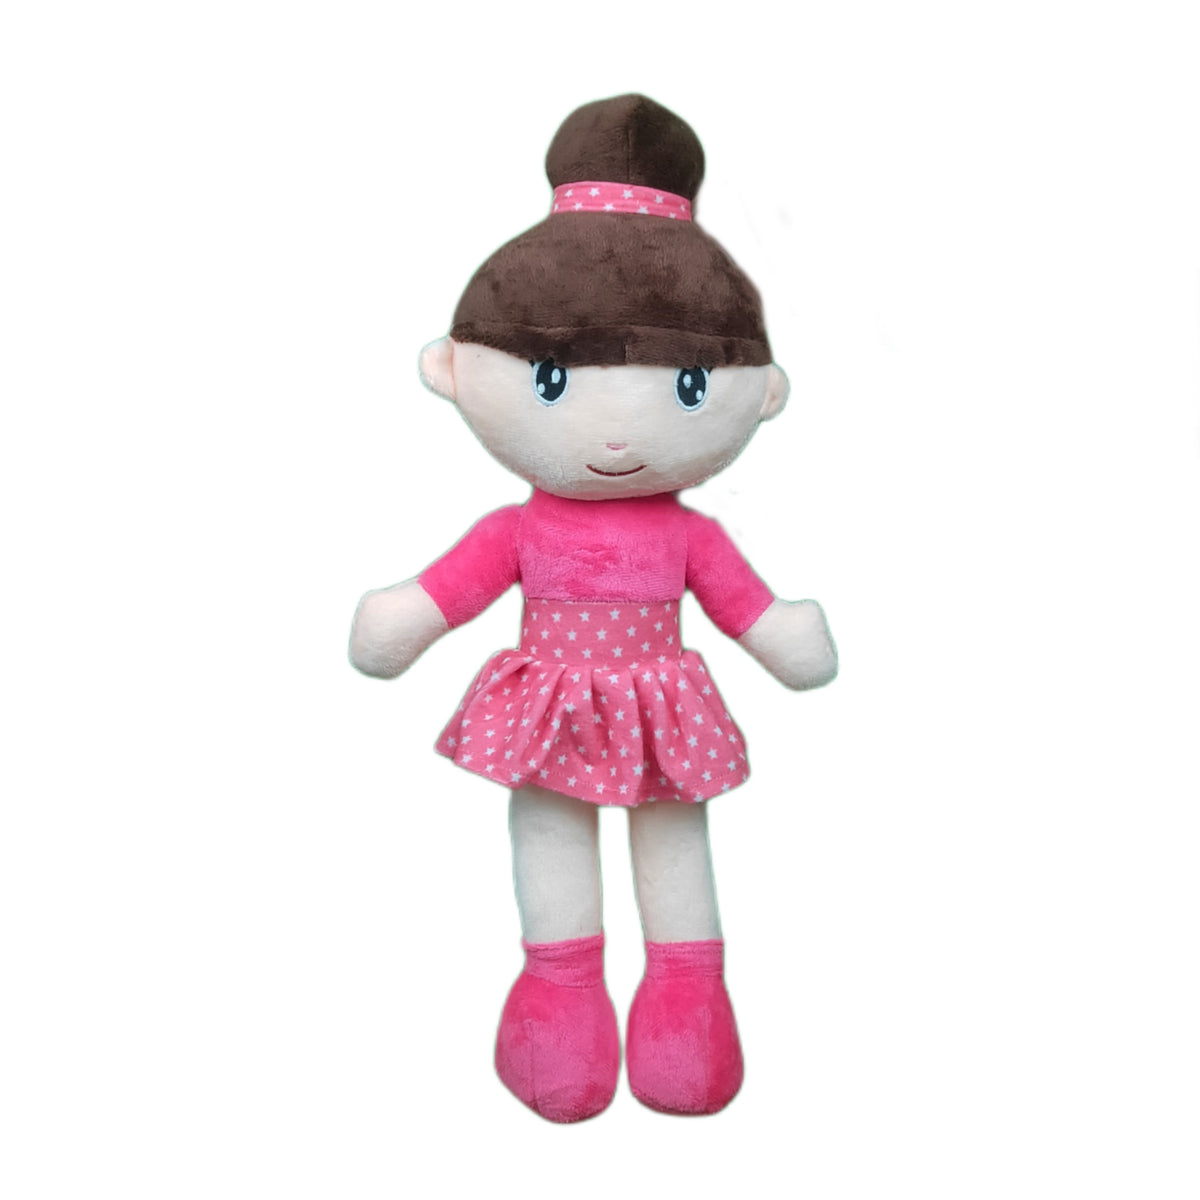 Play Hour Bella Rag Doll Plush Soft Toy Wearing Pink Polka Dot Frock for Ages 3 Years and Up, 45cm